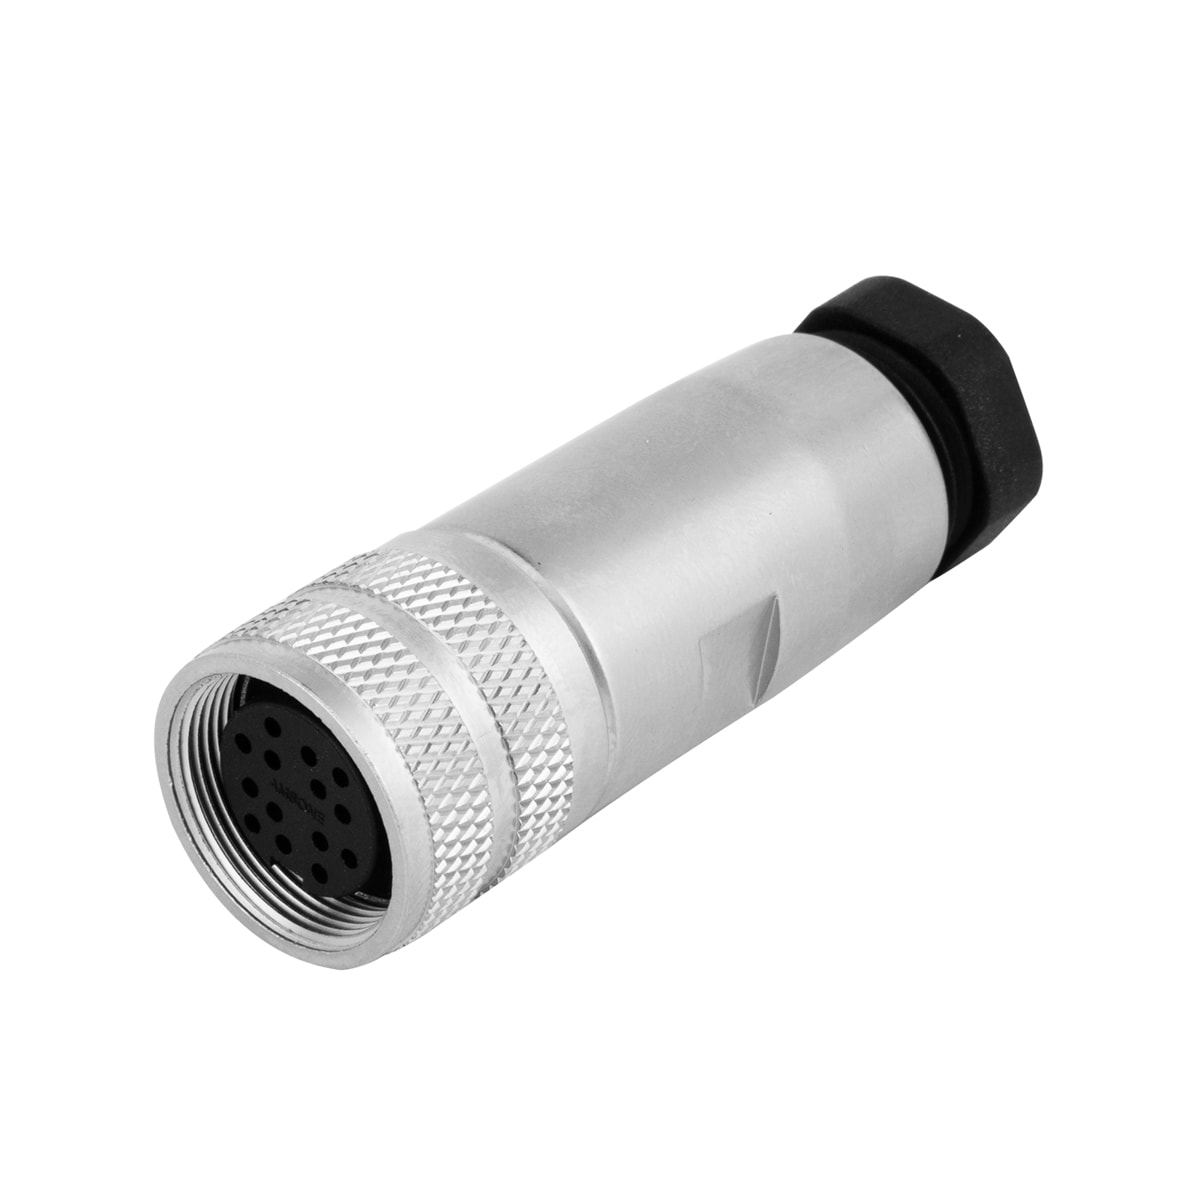 M16 cable connector, female, contacts:19, field assembly type, solder connection, straight, IP67, UL certified